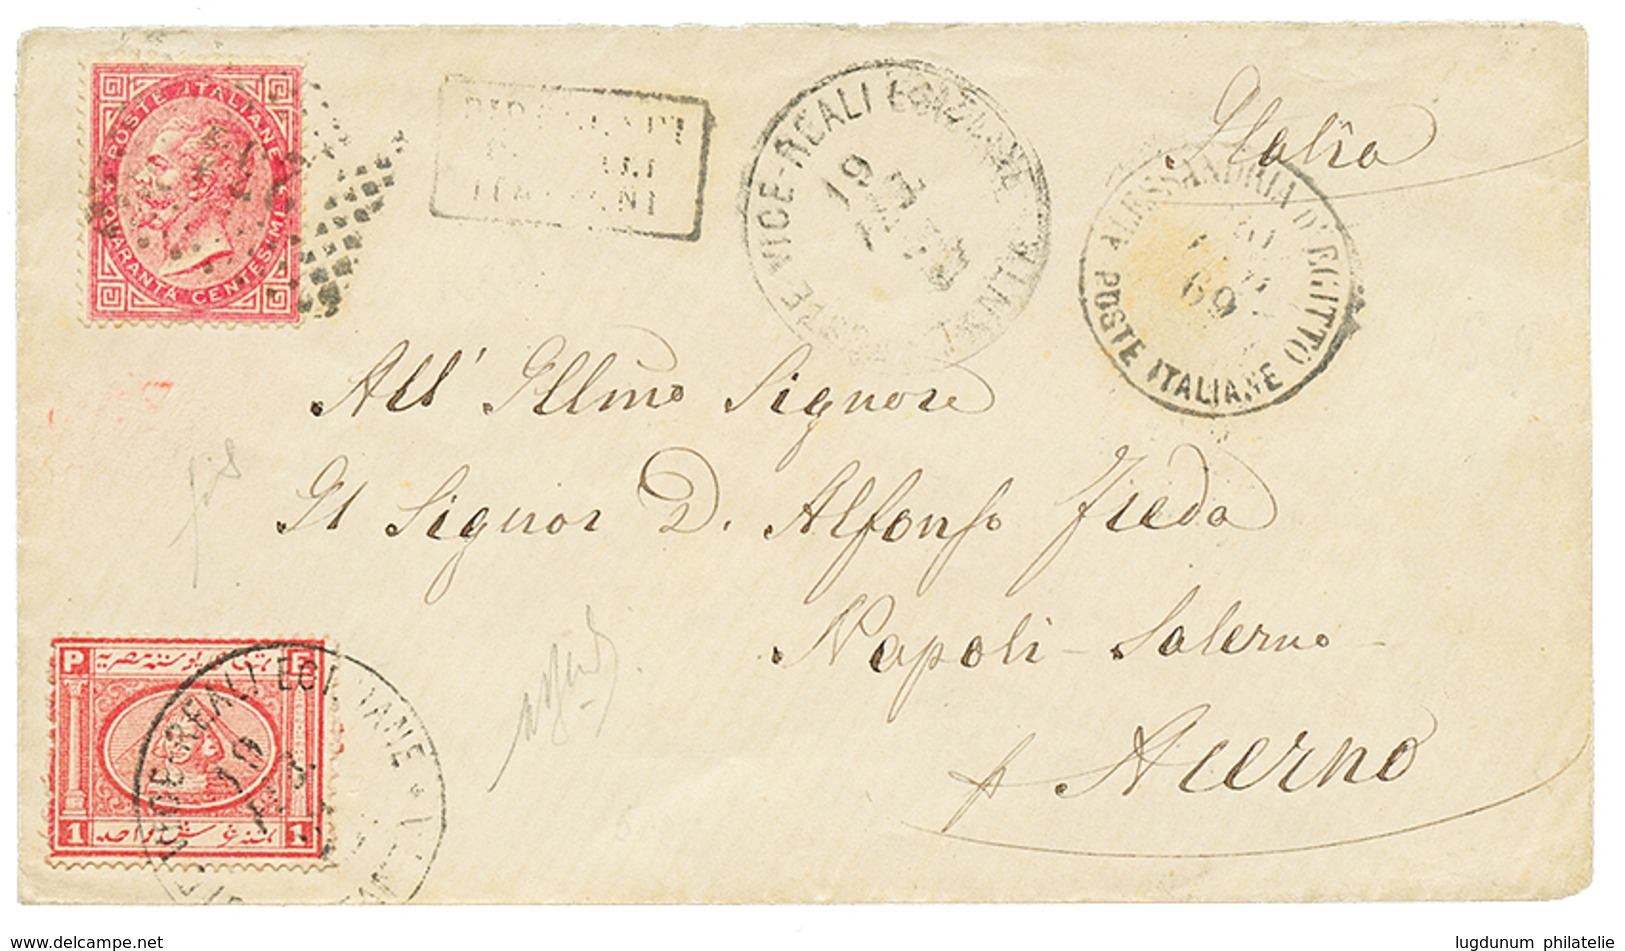 1189 1869 ITALY 20c Canc. 234 + ALLESSANDRIA + EGYPT 1P Canc. TANTA On Envelope To ITALY. Vvf. - Unclassified